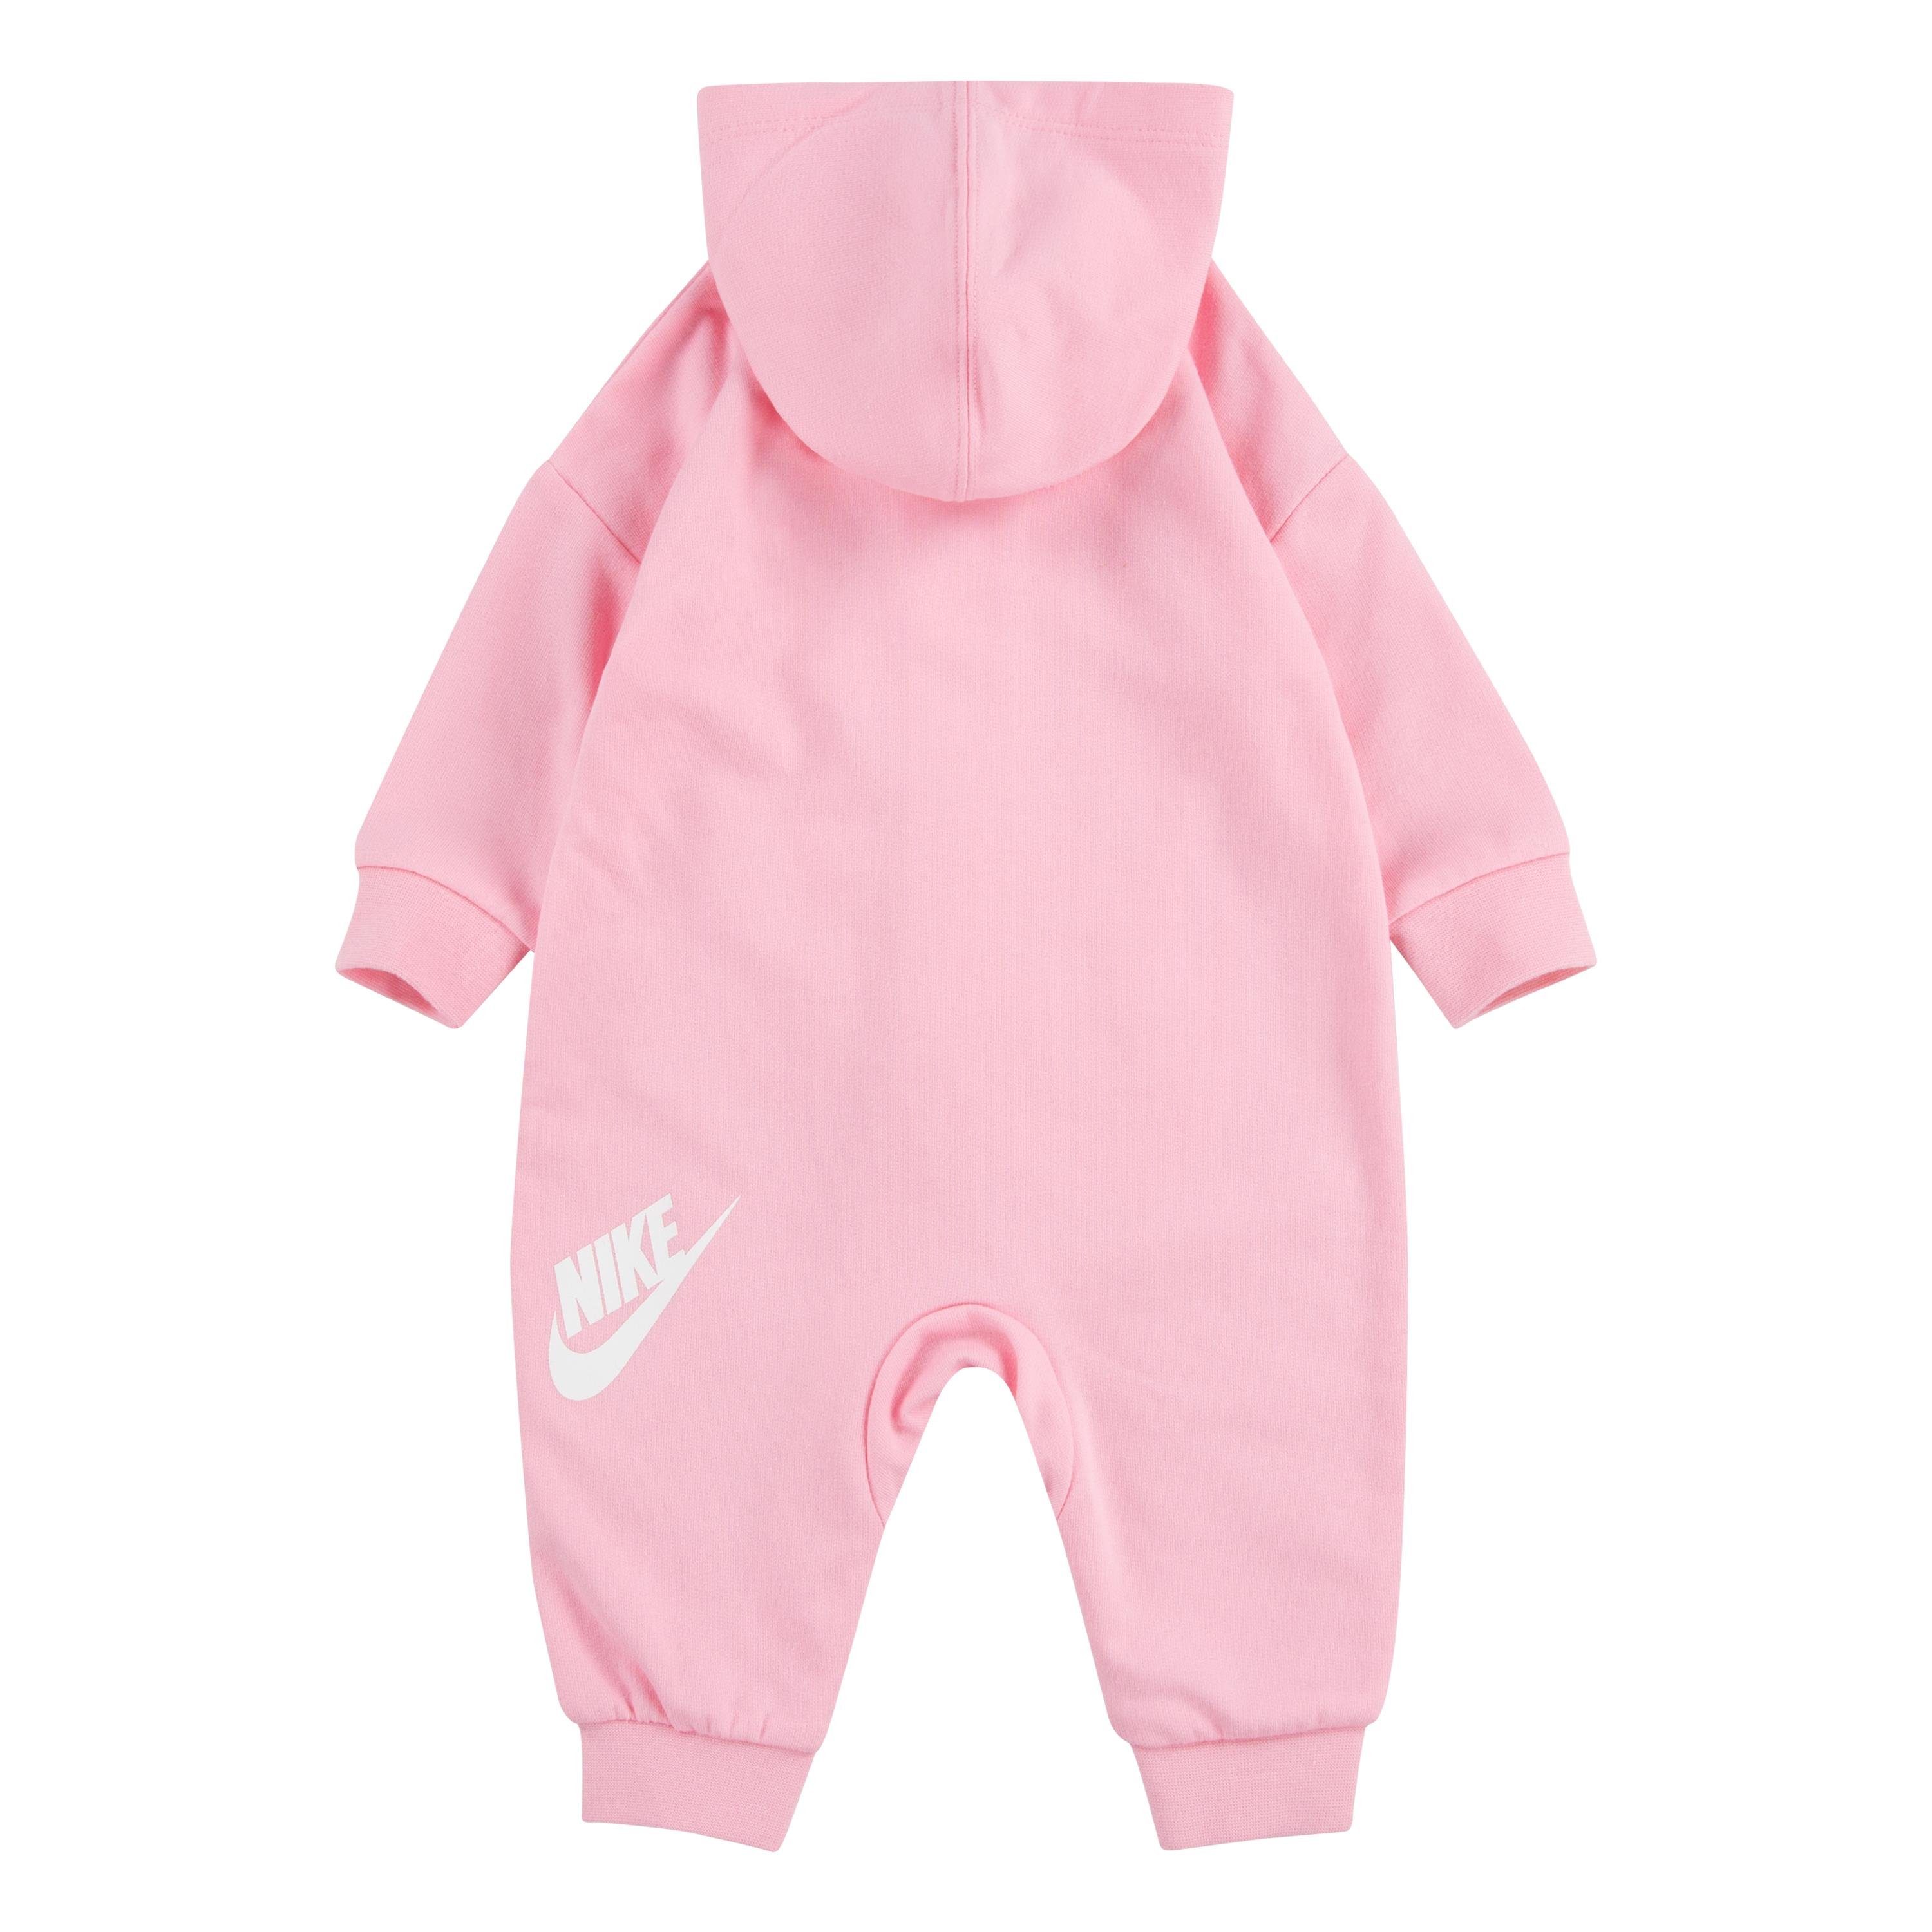 Nike ALL DAY Sportswear rosa-weiß PLAY COVERALL Strampler NKN